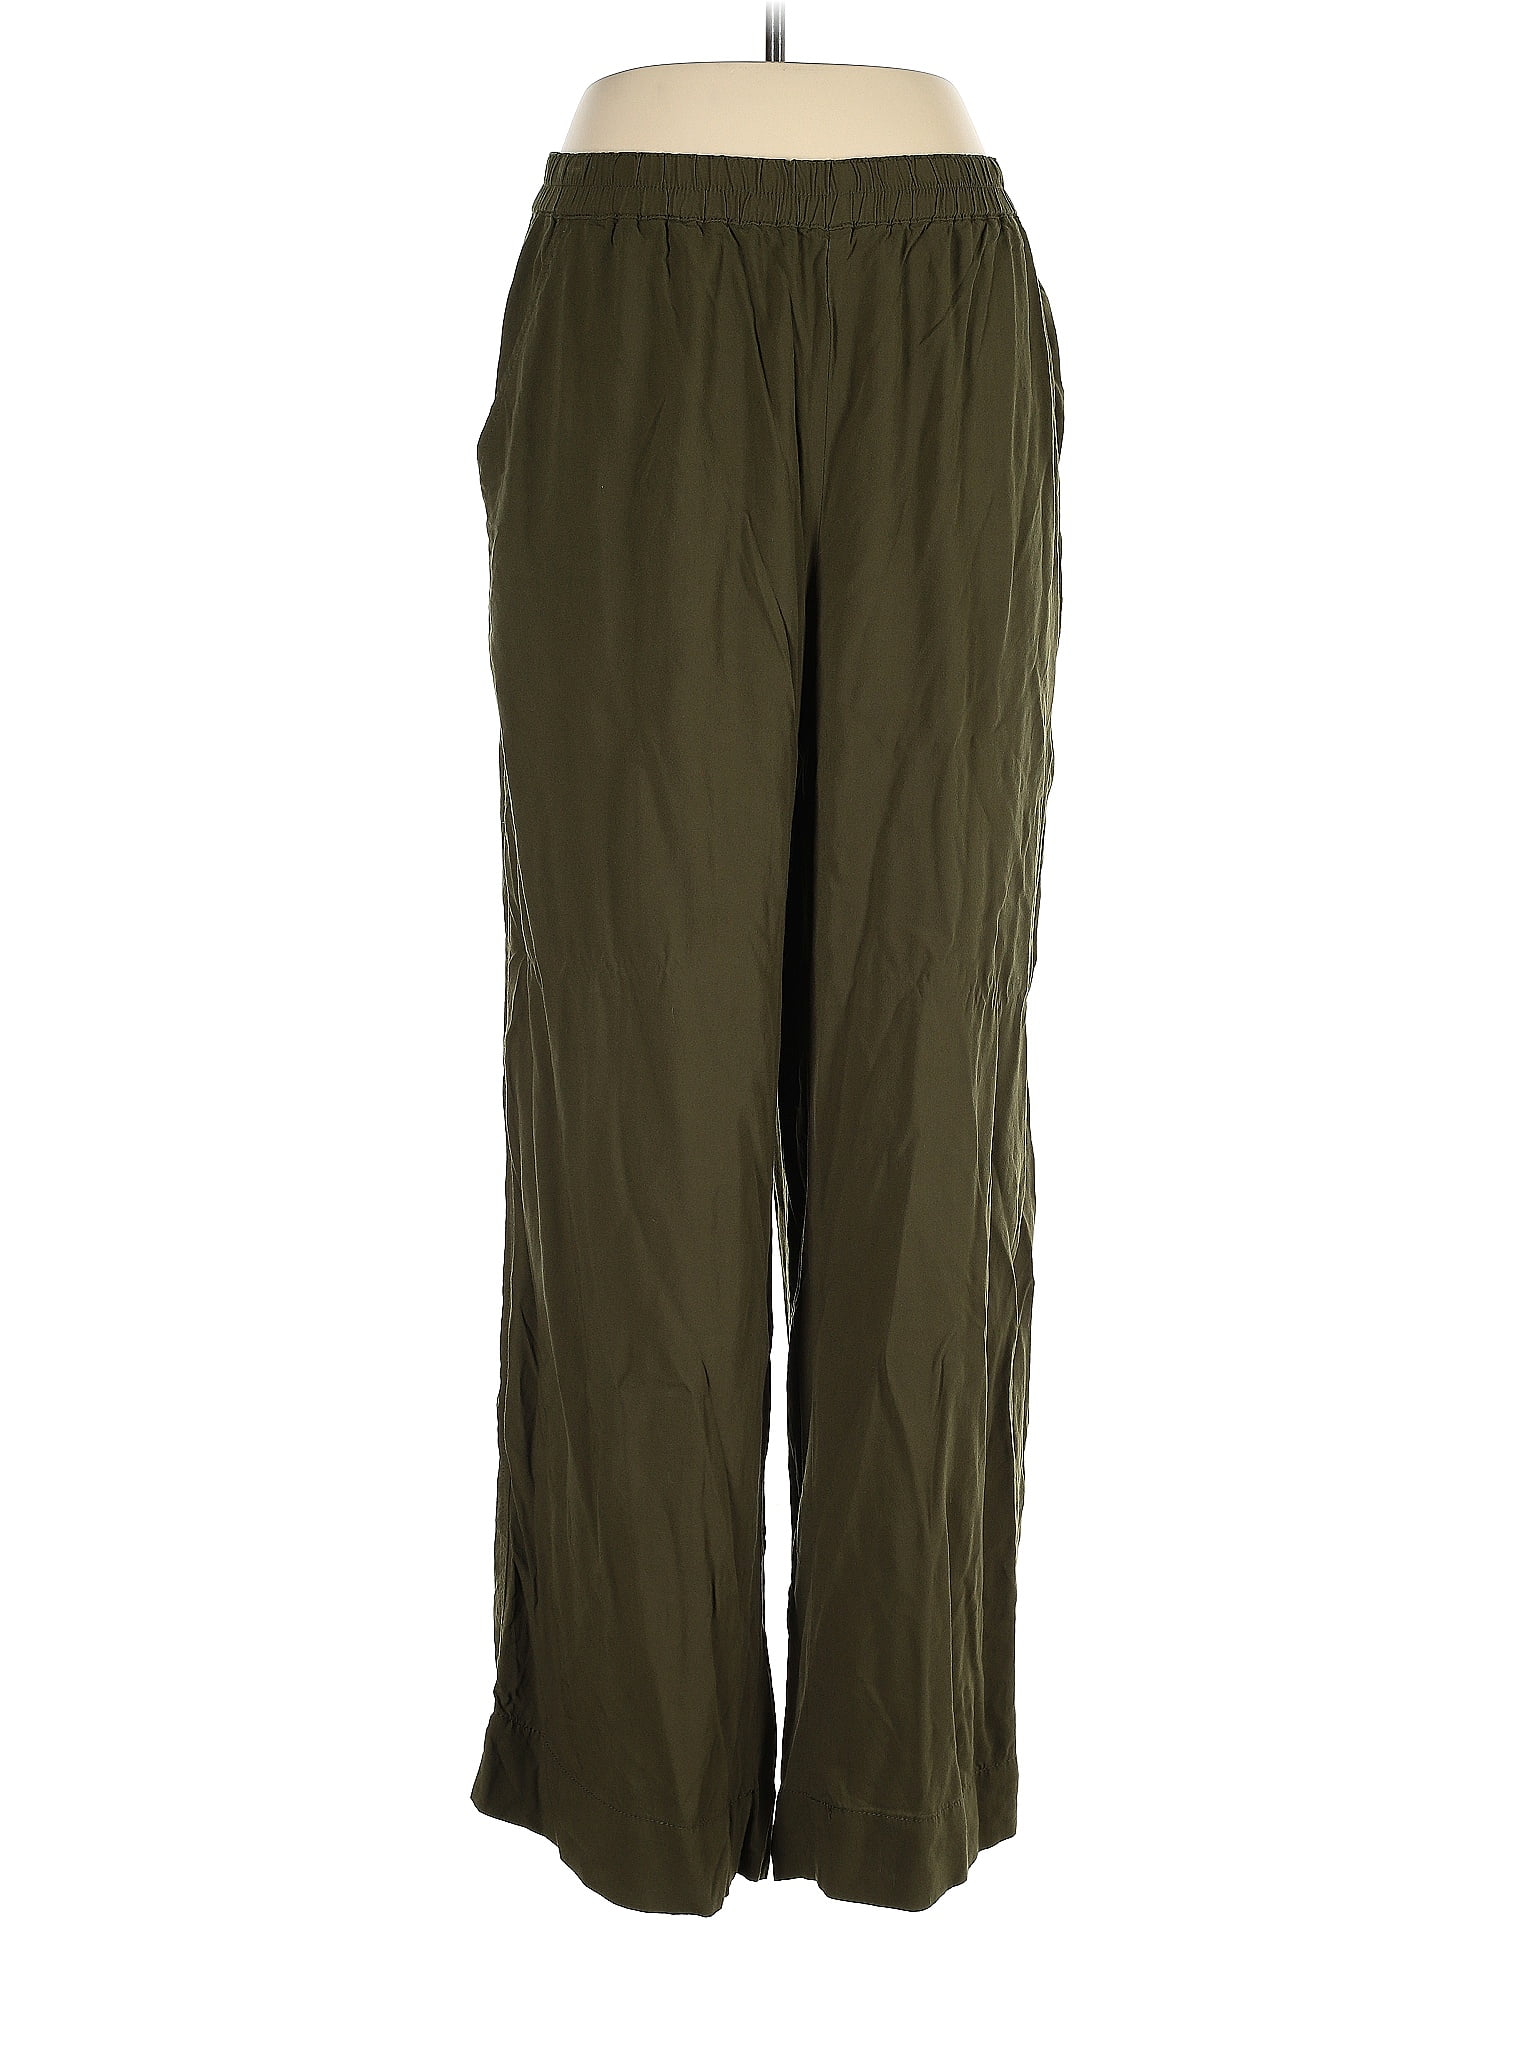 Uniqlo Womens Bottoms  Flannel Pants (Jw Anderson) GREEN